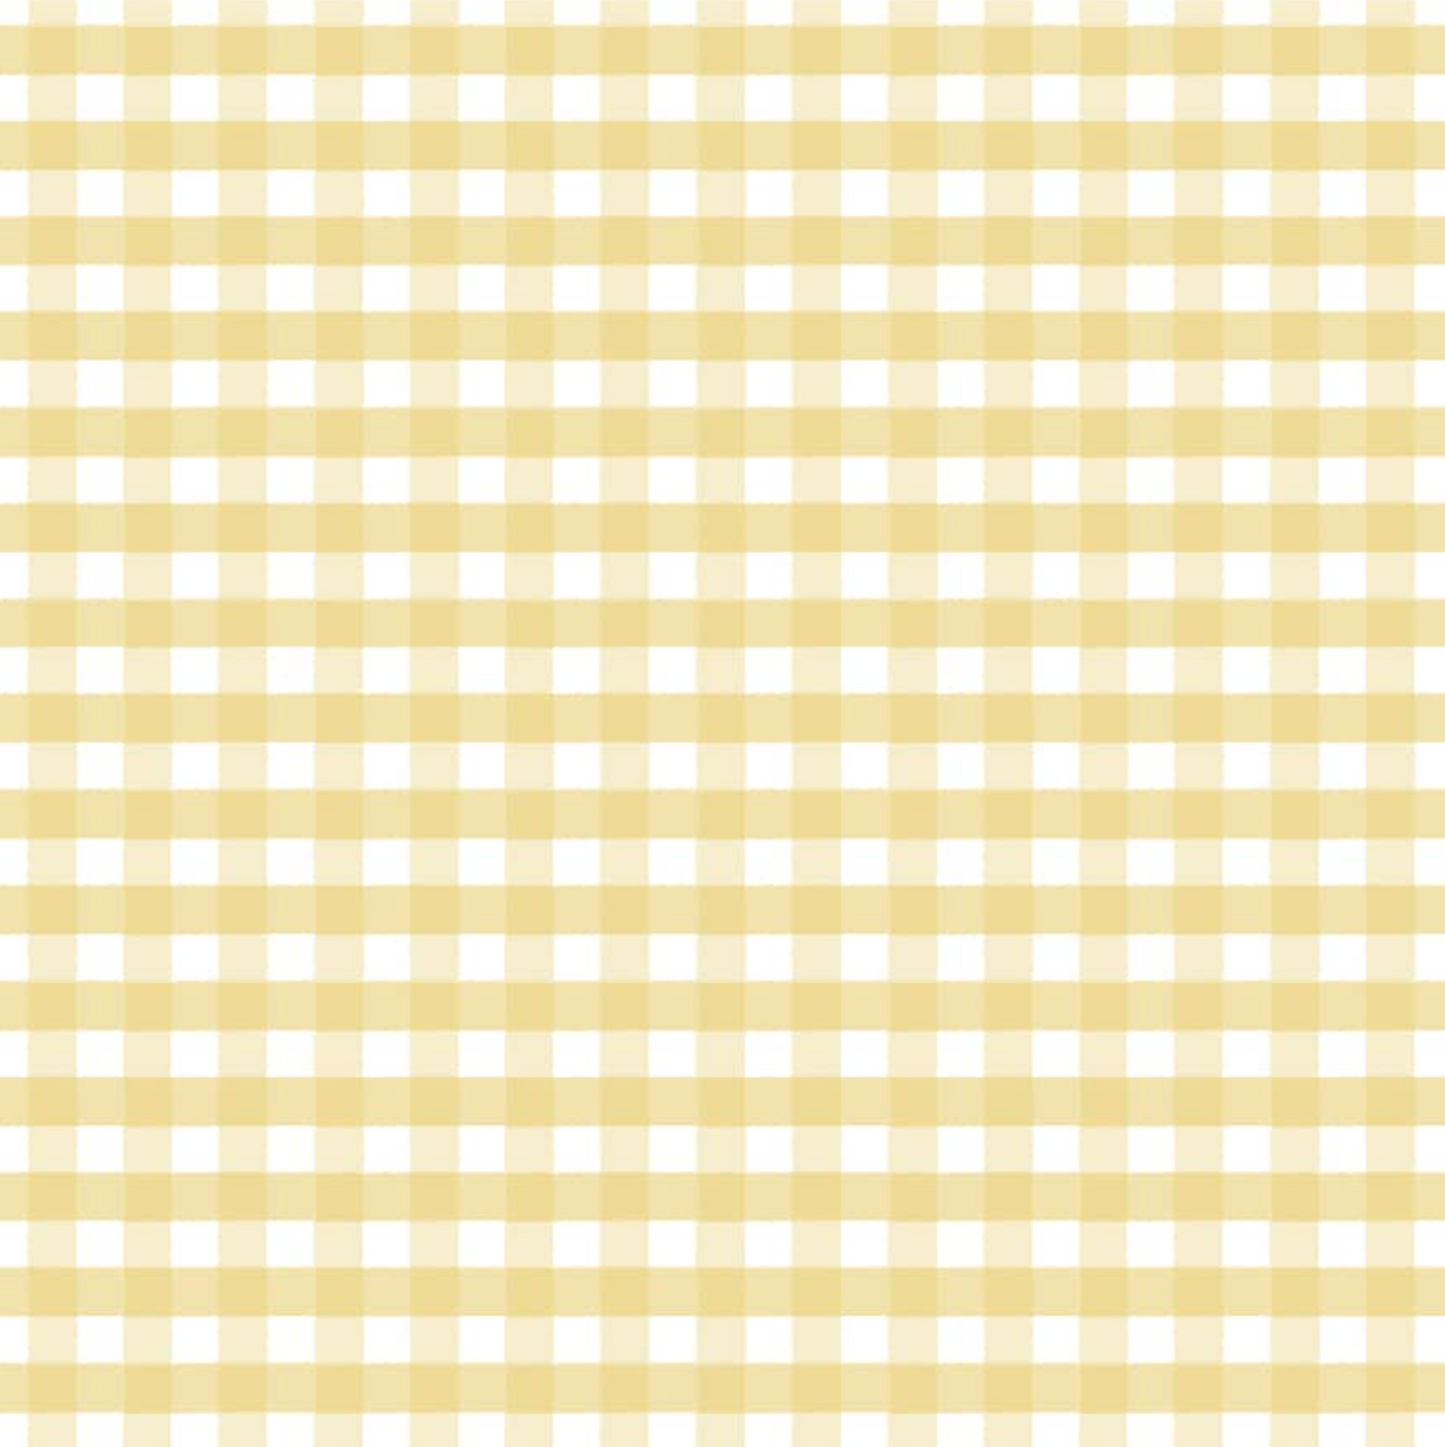 Delightful Department Store Pretty in Plaid Yellow DS23219, sold by the 1/2 yard